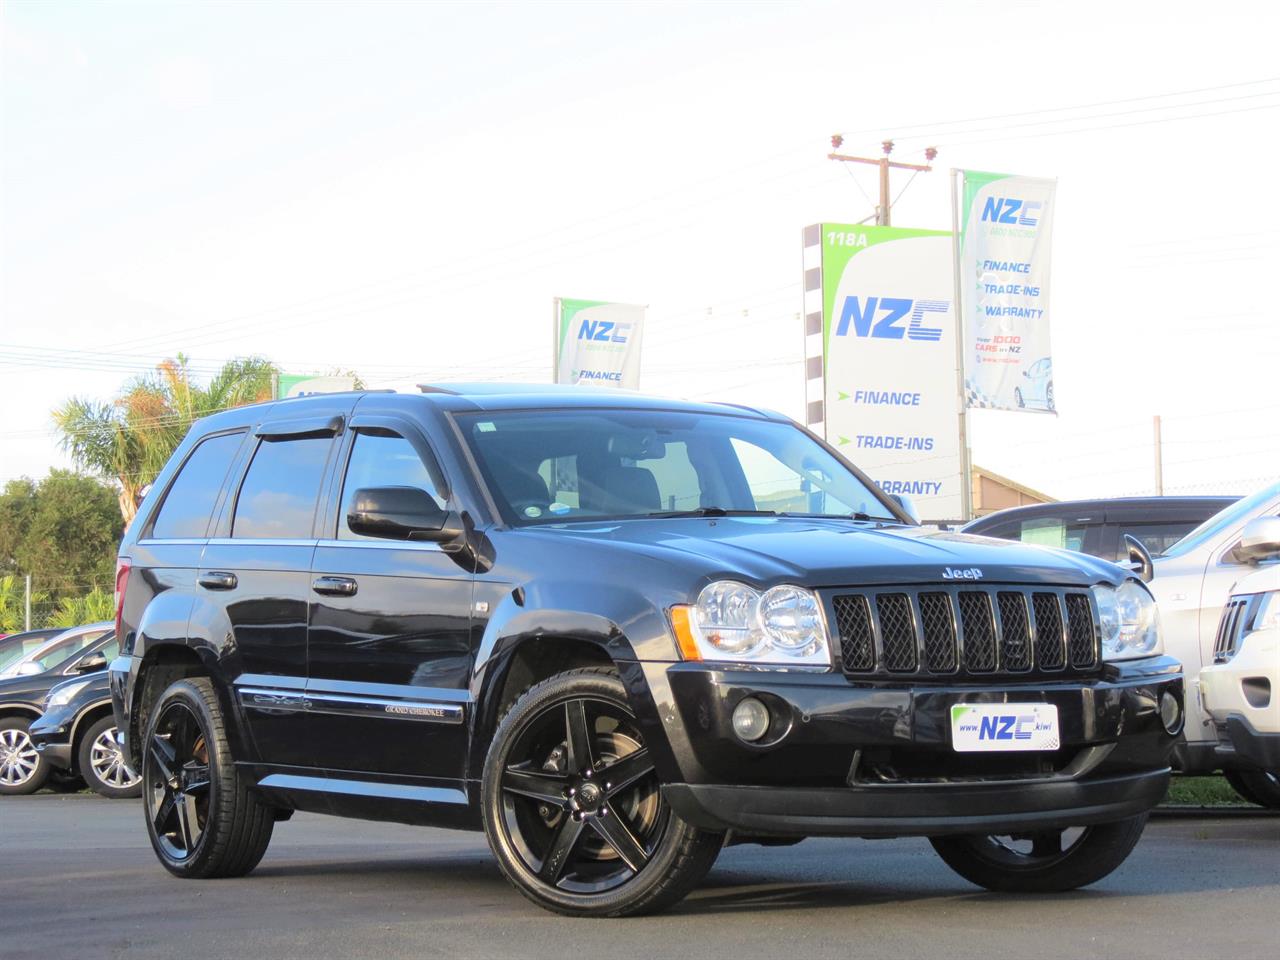 NZC 2007 Jeep Grand Cherokee just arrived to Auckland